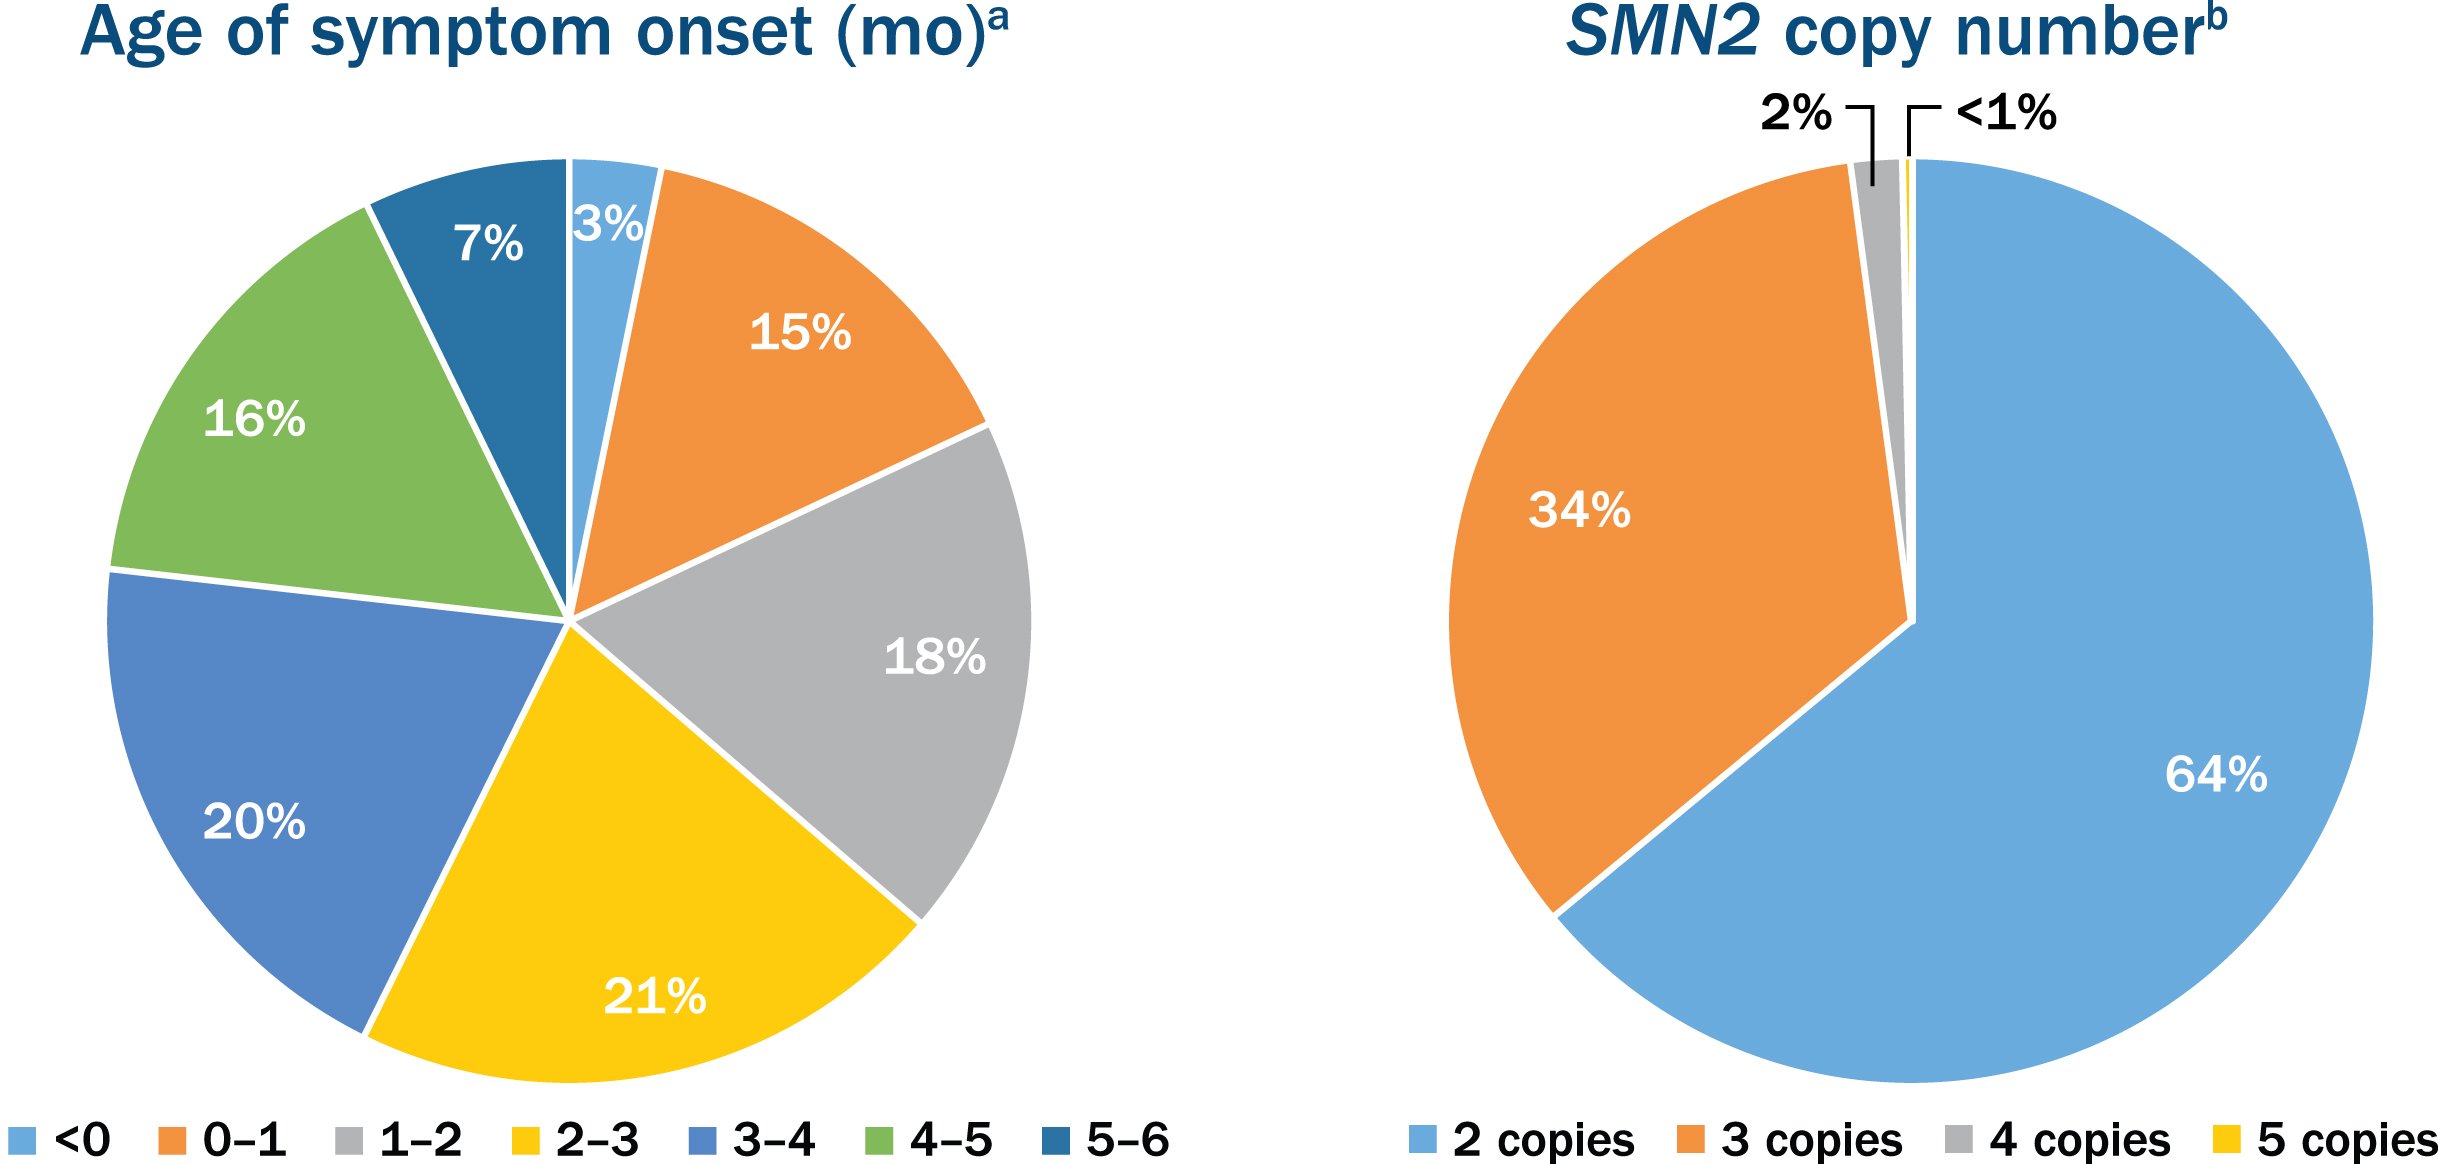 Age of symptom onset and the survival motor neuron 2 (SMN2) copy number in participants enrolled in the nusinersen expanded access program. aOut of the 776 participants with age of onset of symptoms ranging from 0 to 6 months. bOut of the 381 participants who reported SMN2 copy number.